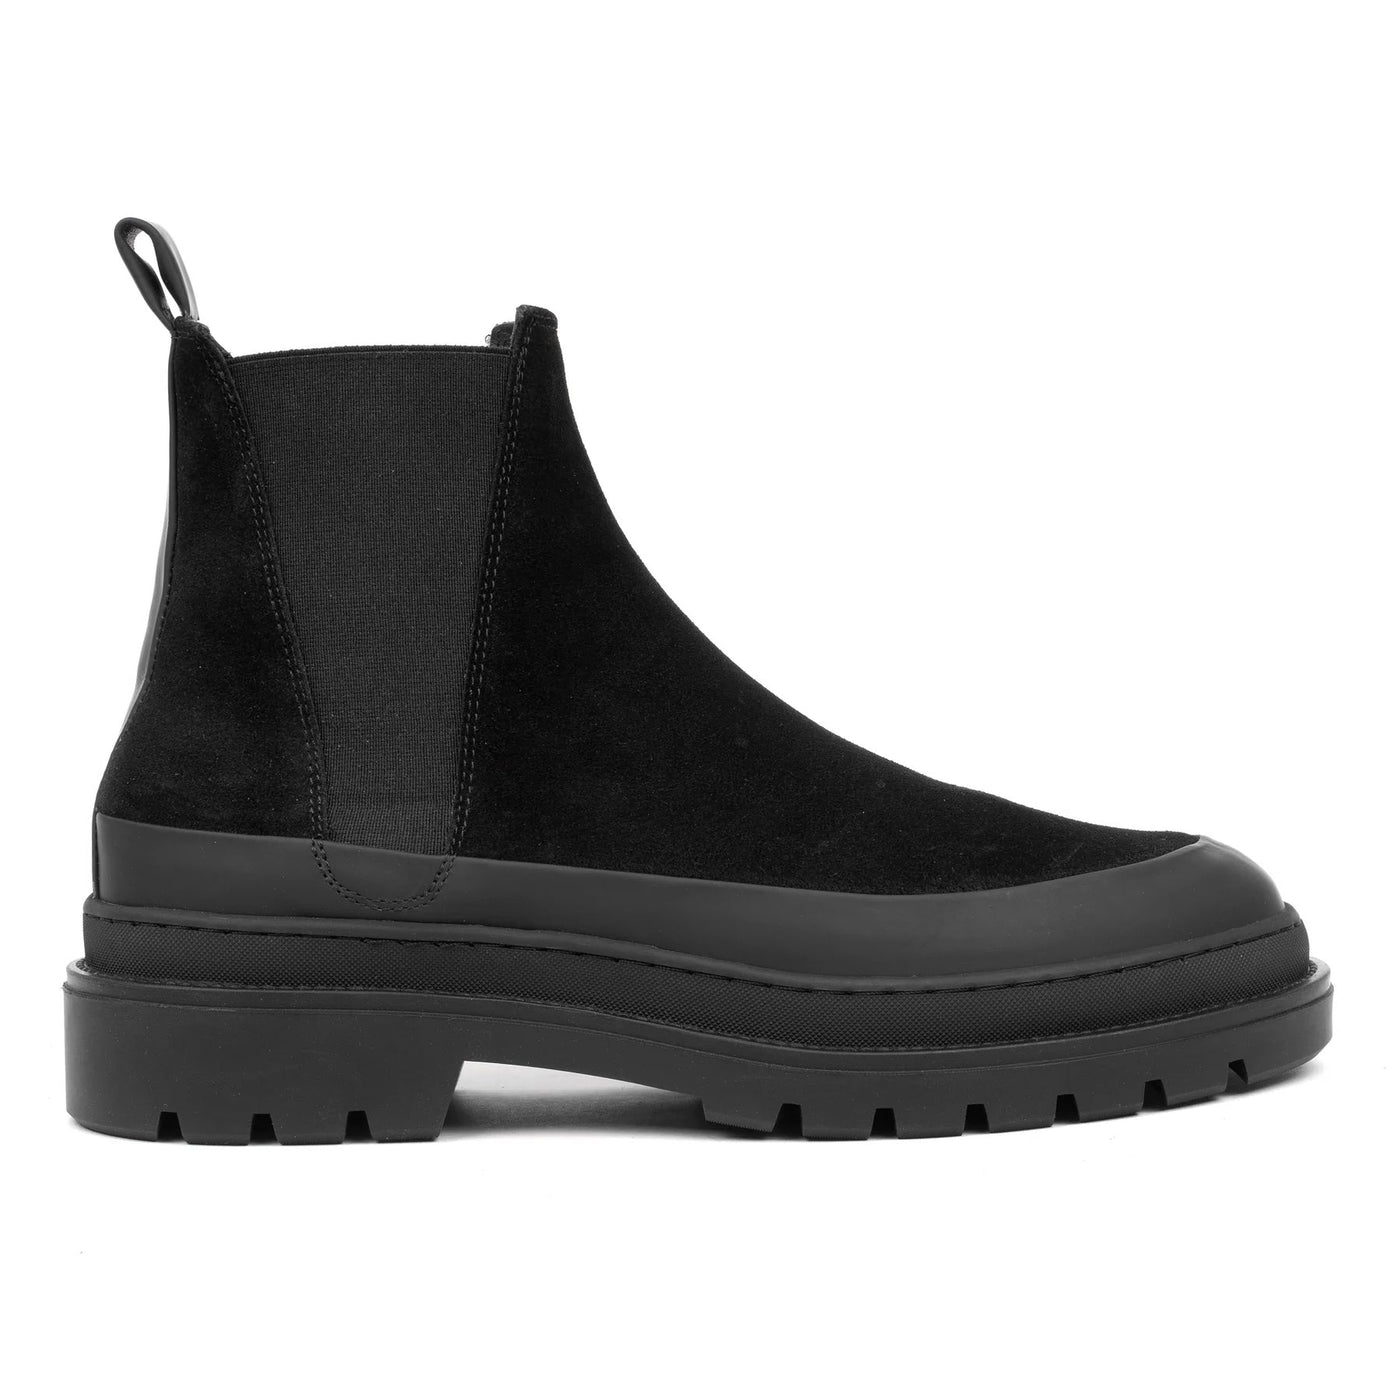 SPECTER CHELSEA BOOT Black Leather Suede - HINSON | ALPINA